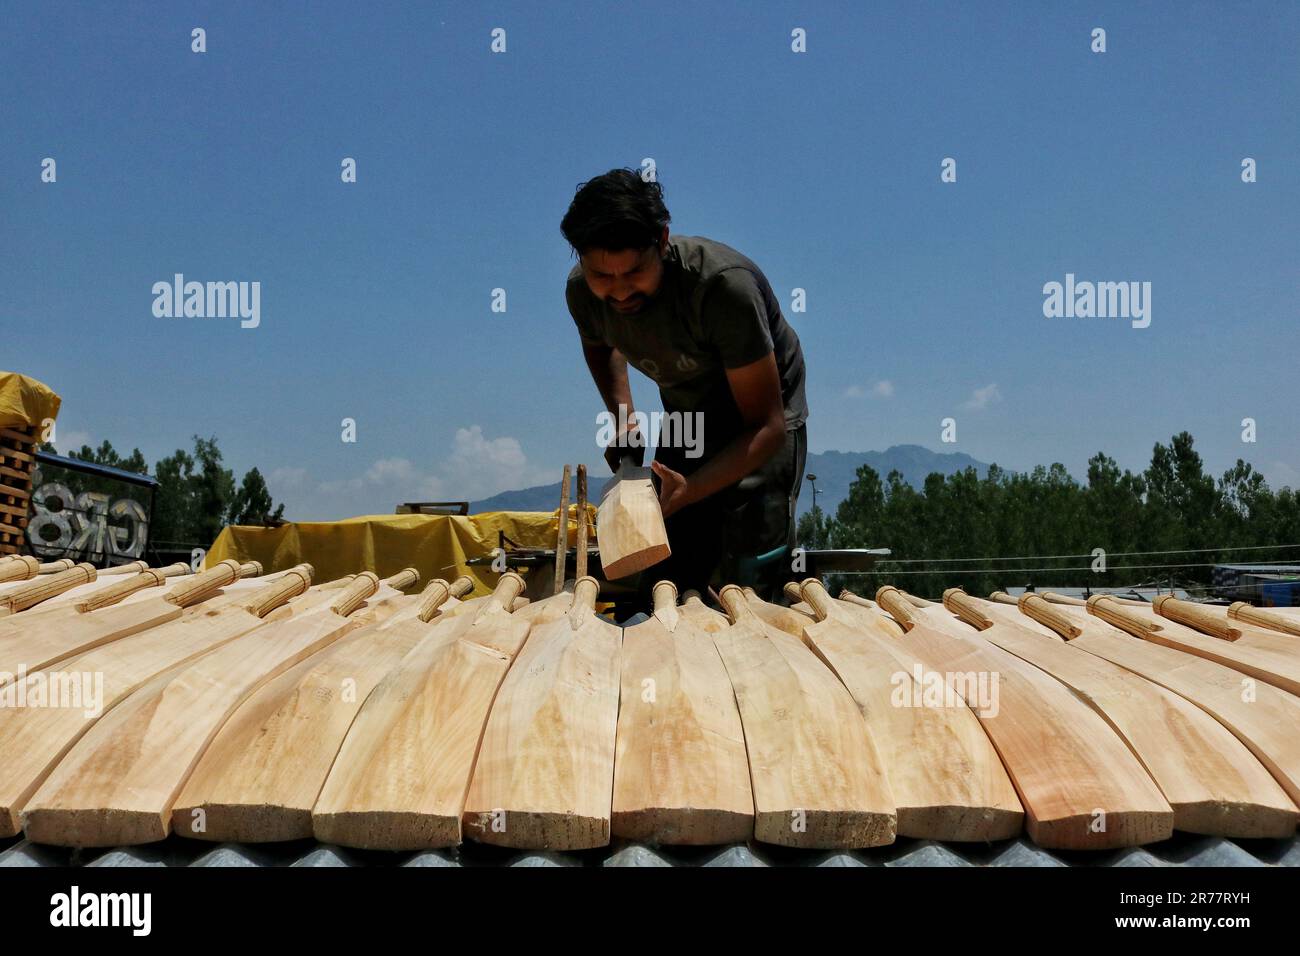 June 12, 2023, Srinagar Kashmir, India : A labourer checks raw GR8 cricket bats at a manufacturing unit in Sangam, some 38 kilometers south of Srinagar. Kashmir's bat manufacturers have received an order for bats to be used during the 2023 One Day International (ODI) World Cup; they even earlier have had an order for 10 bats for the Twenty20 (T20) World Cup in 2022. Only two types of bats are used in cricket around the world - English Willow and Kashmiri Willow - and while the prices of English Willow are many times higher than those made of Kashmir Willow and are more often used by players, t Stock Photo